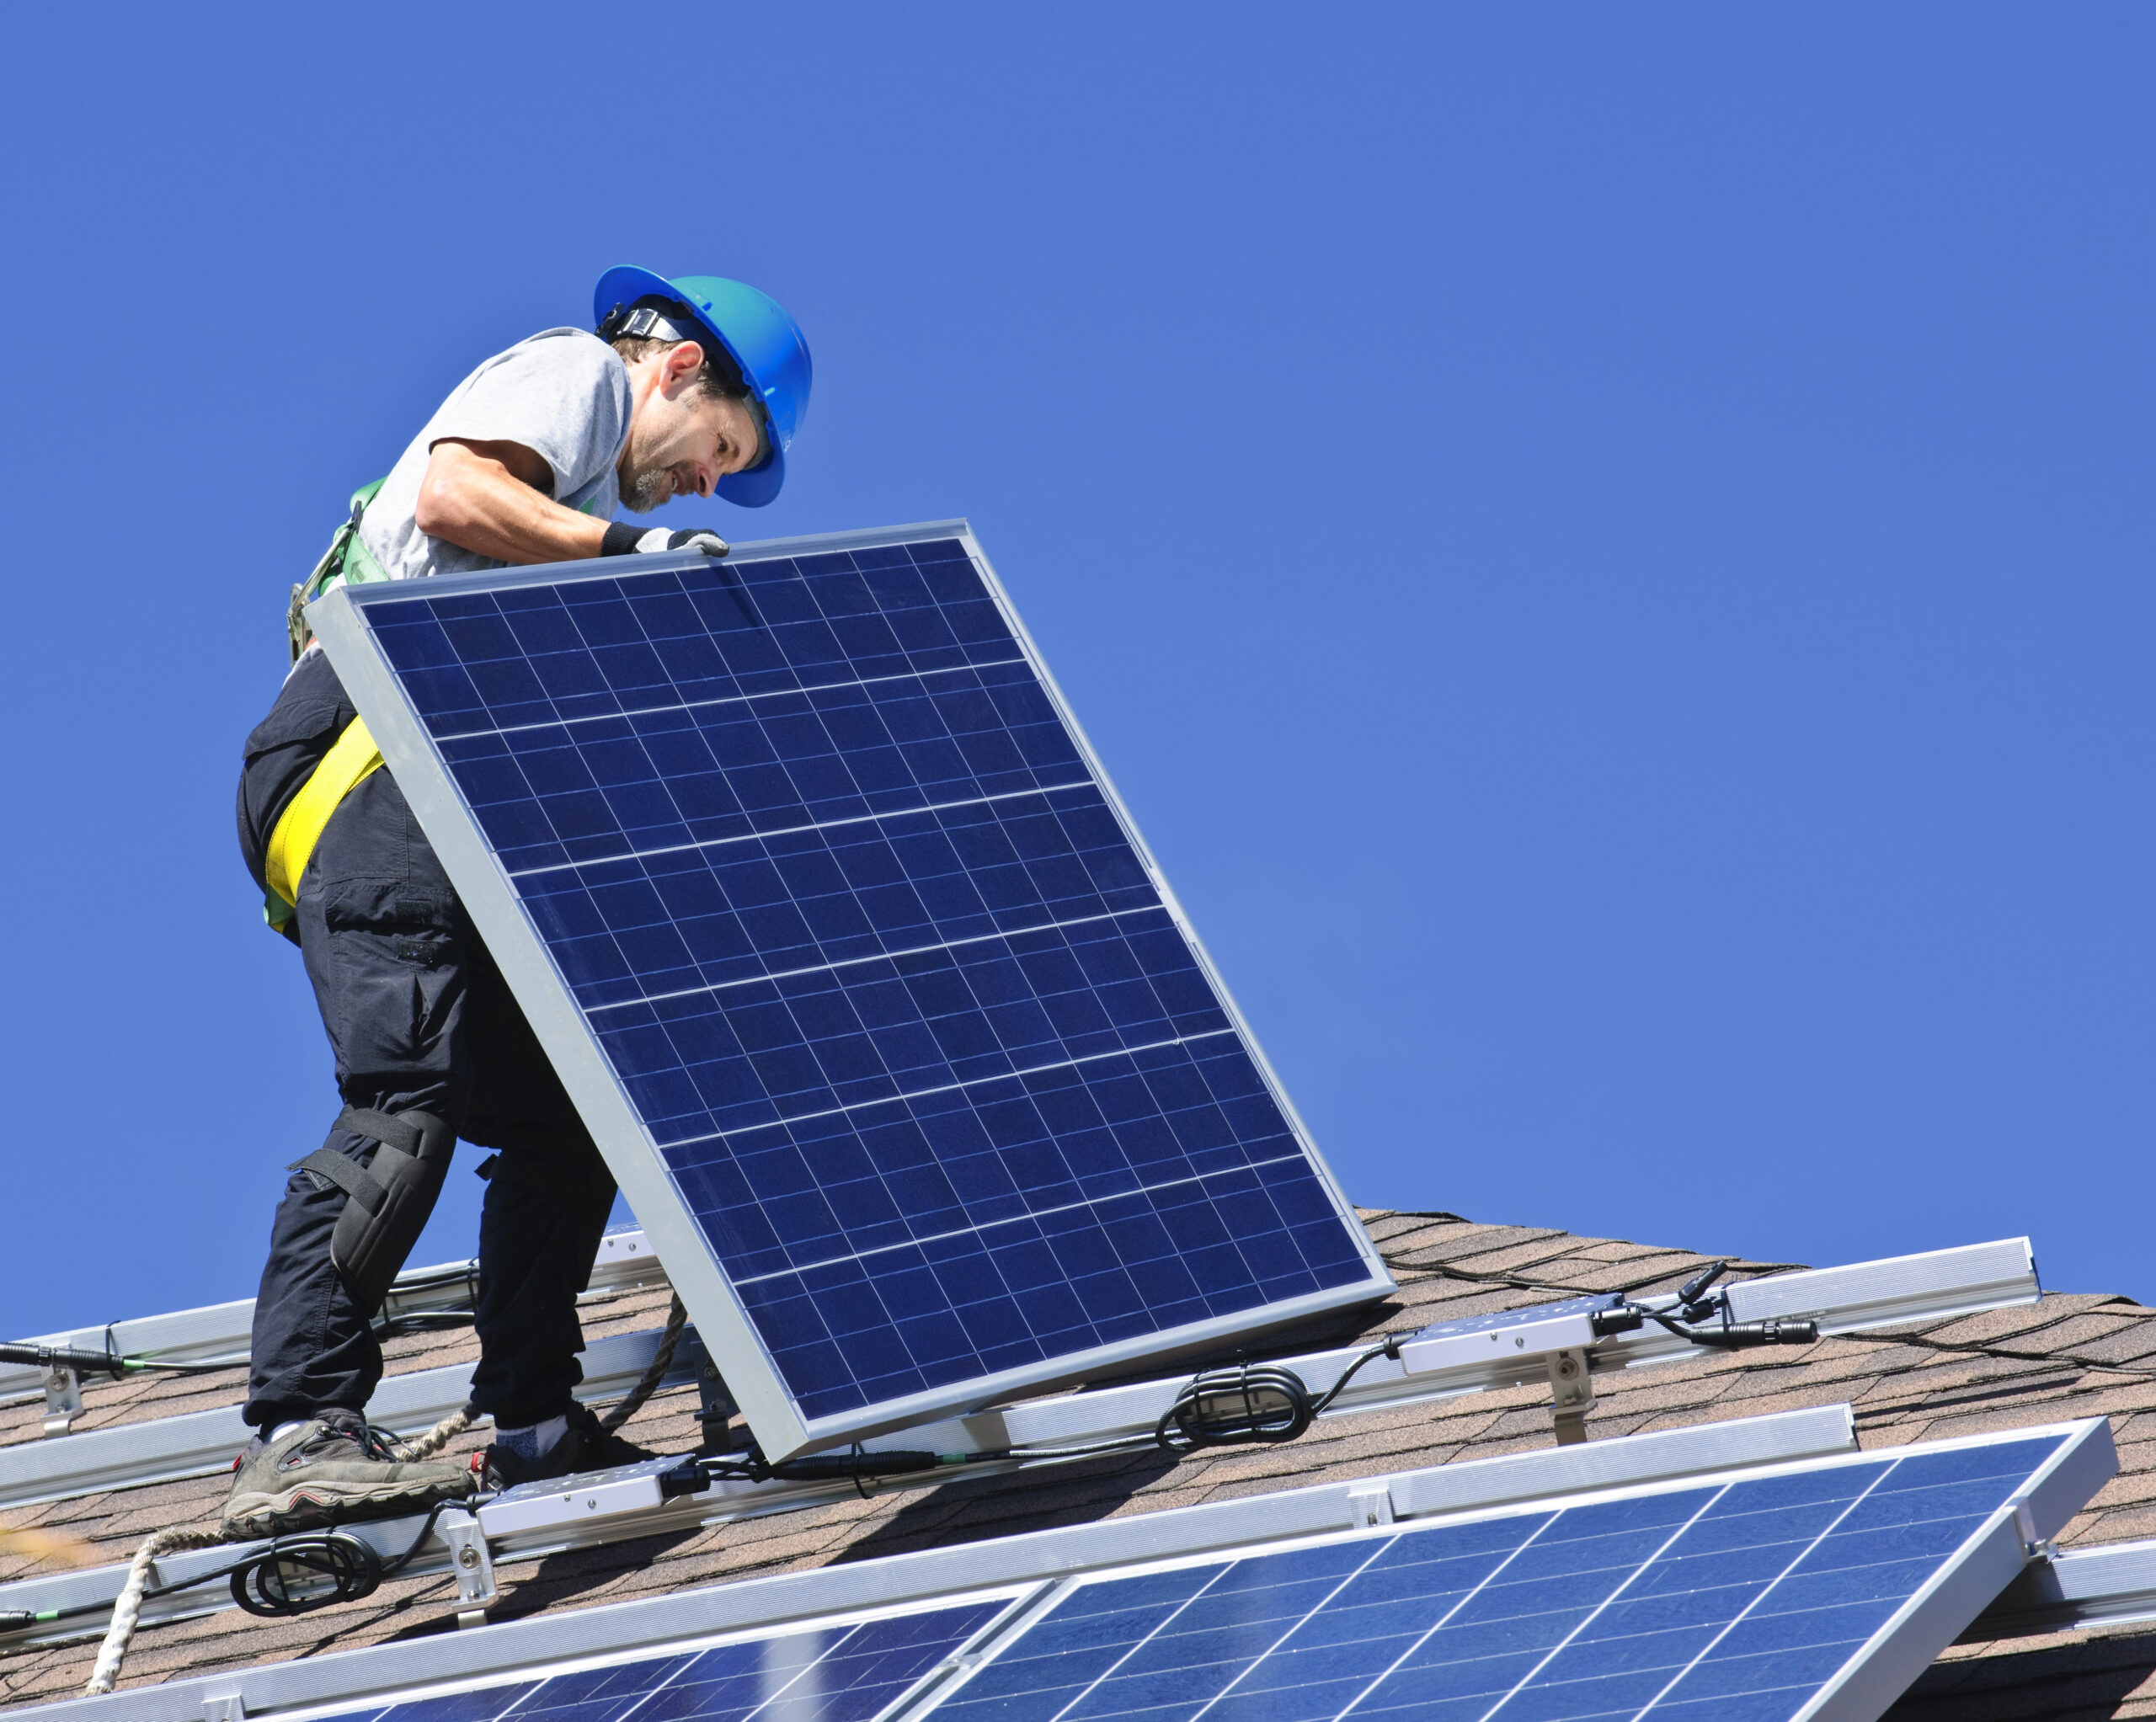 installing-solar-panels-as-a-way-to-reduce-your-tnb-bills